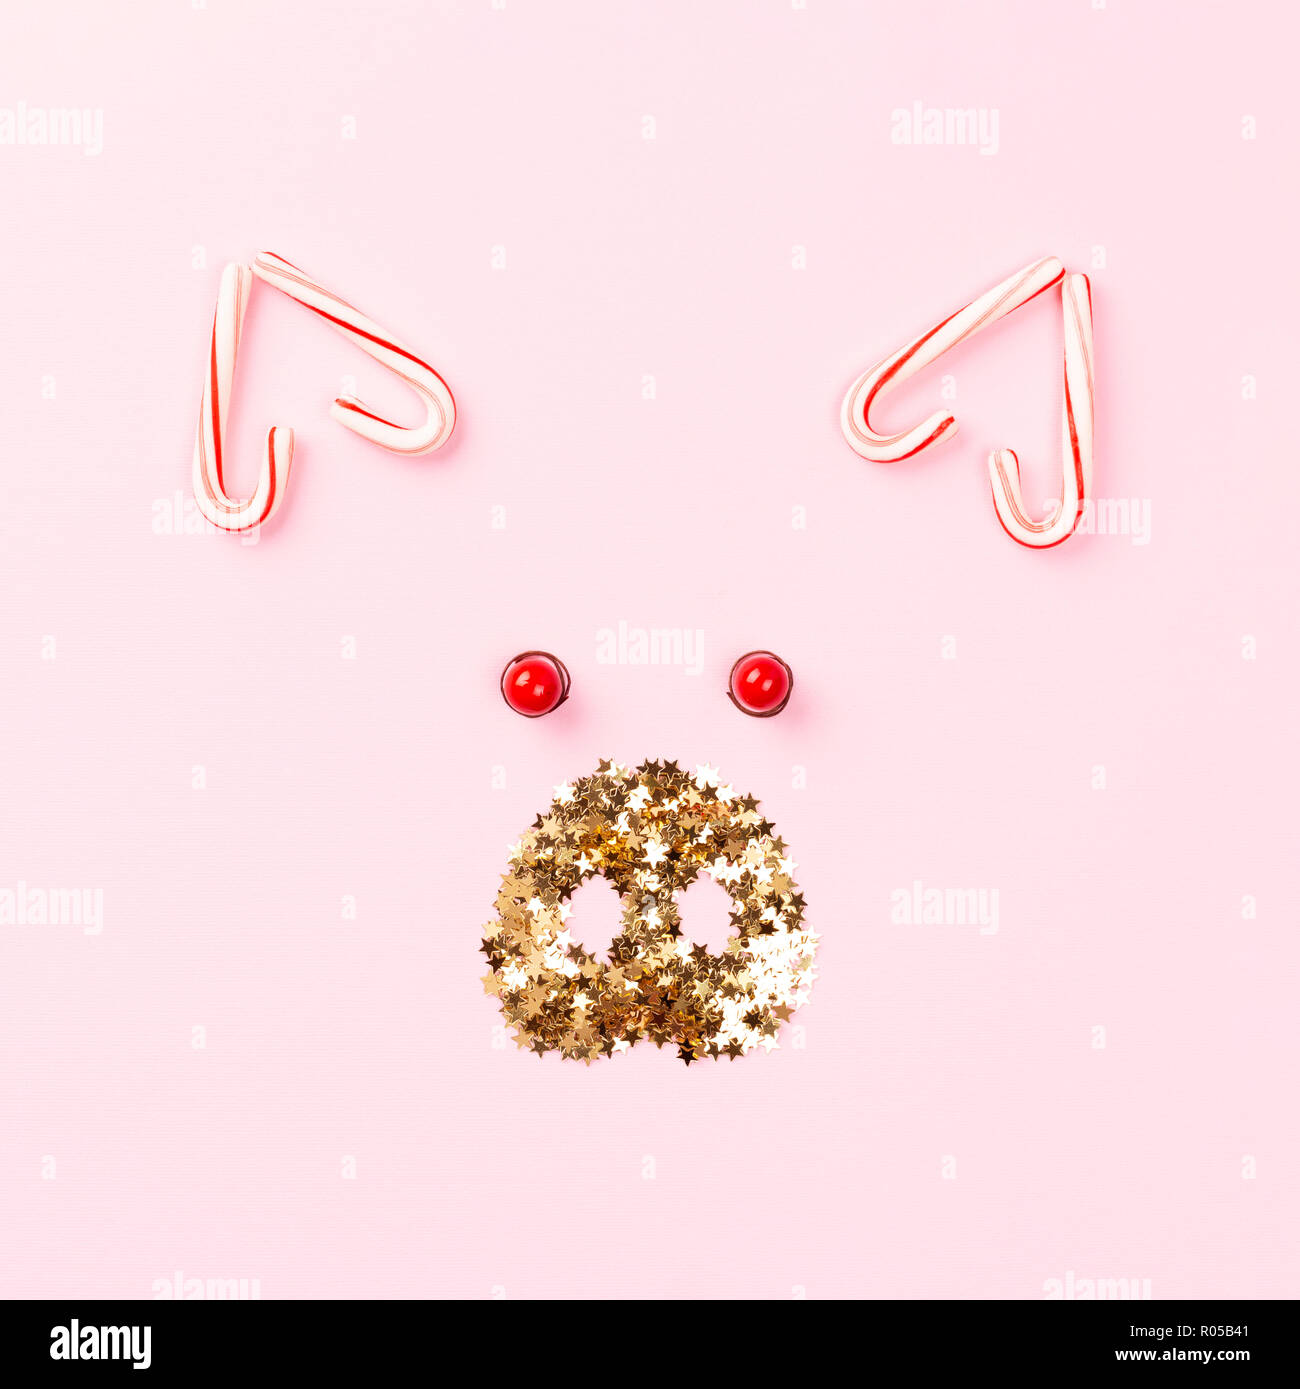 Christmas pig concept made of candy cane lollipops and golden confetti on pink background. Stock Photo